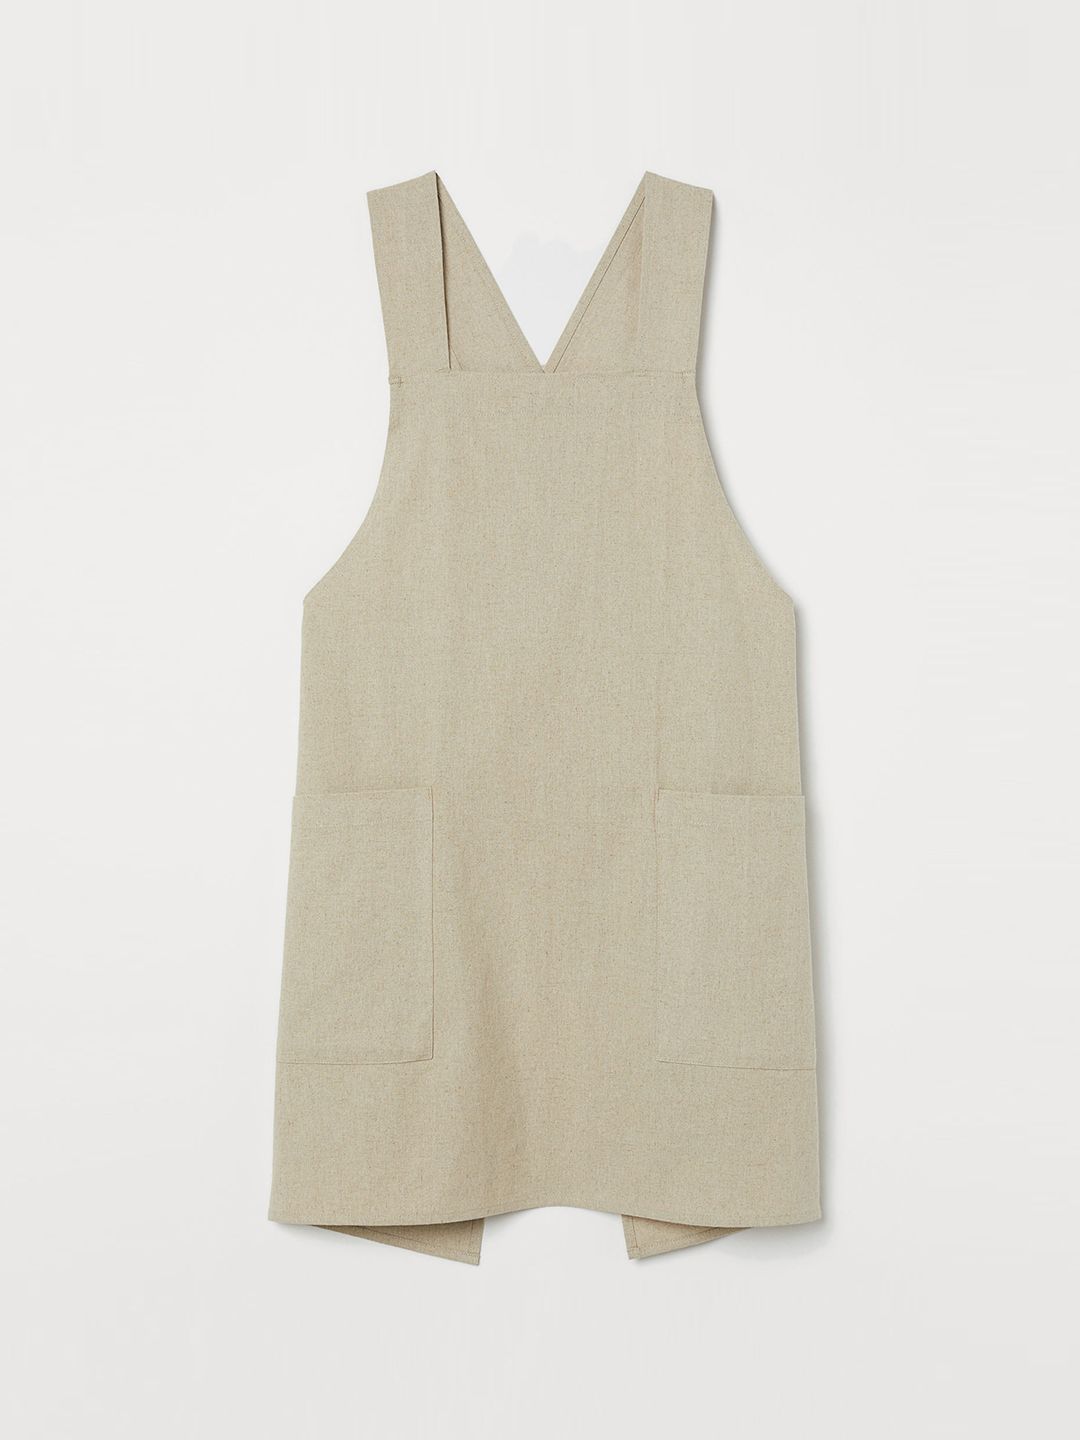 H&M Beige Linen-blend Apron Price in India